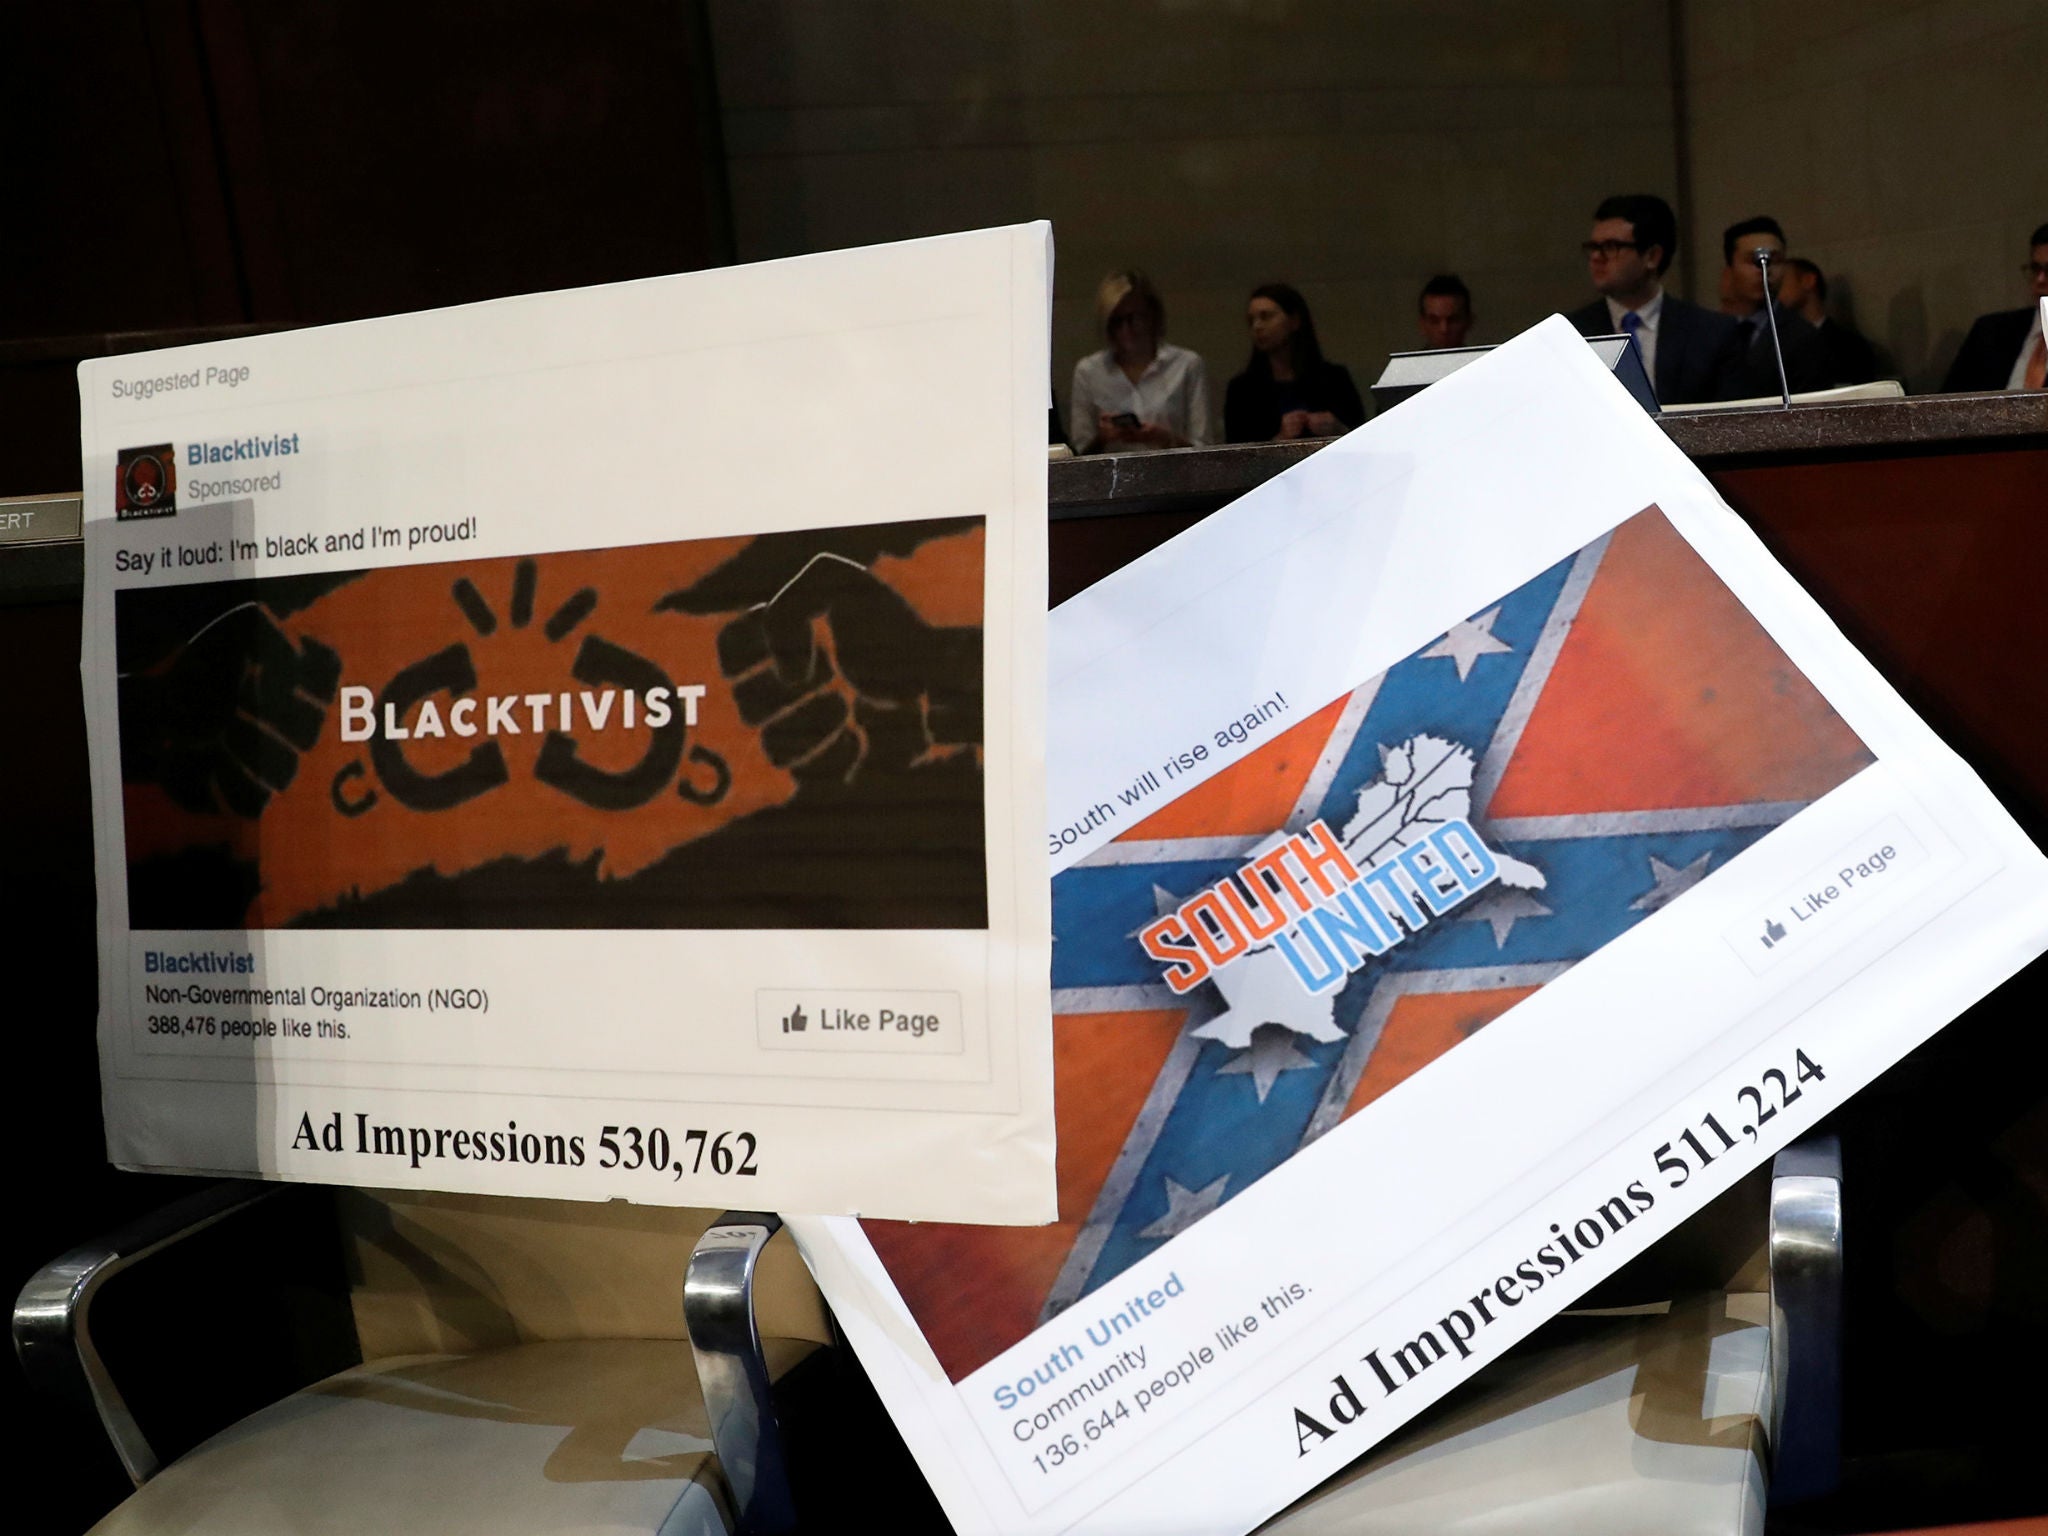 Examples of Russian-linked Facebook pages are seen during a congressional hearing on social media and election interference